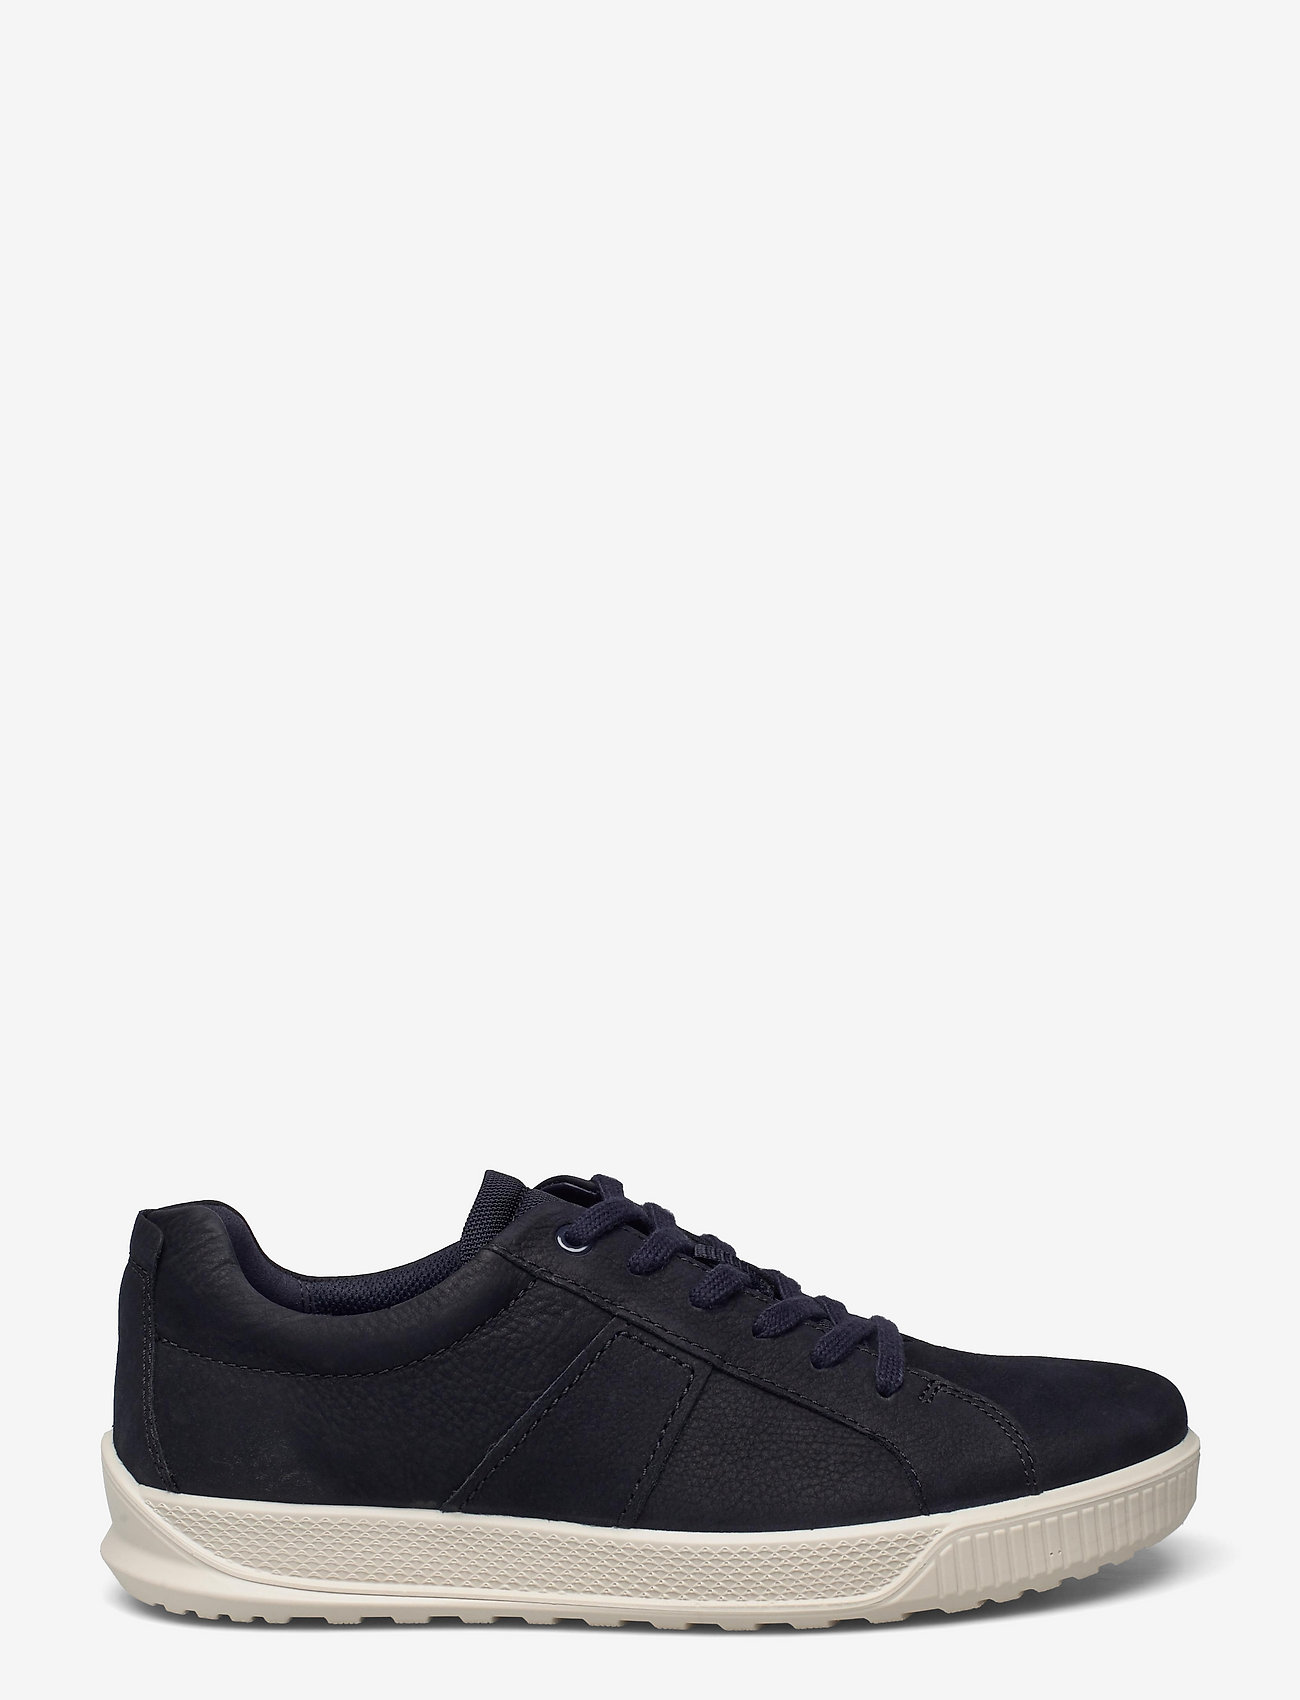 ECCO - BYWAY - lave sneakers - night sky/night sky - 1